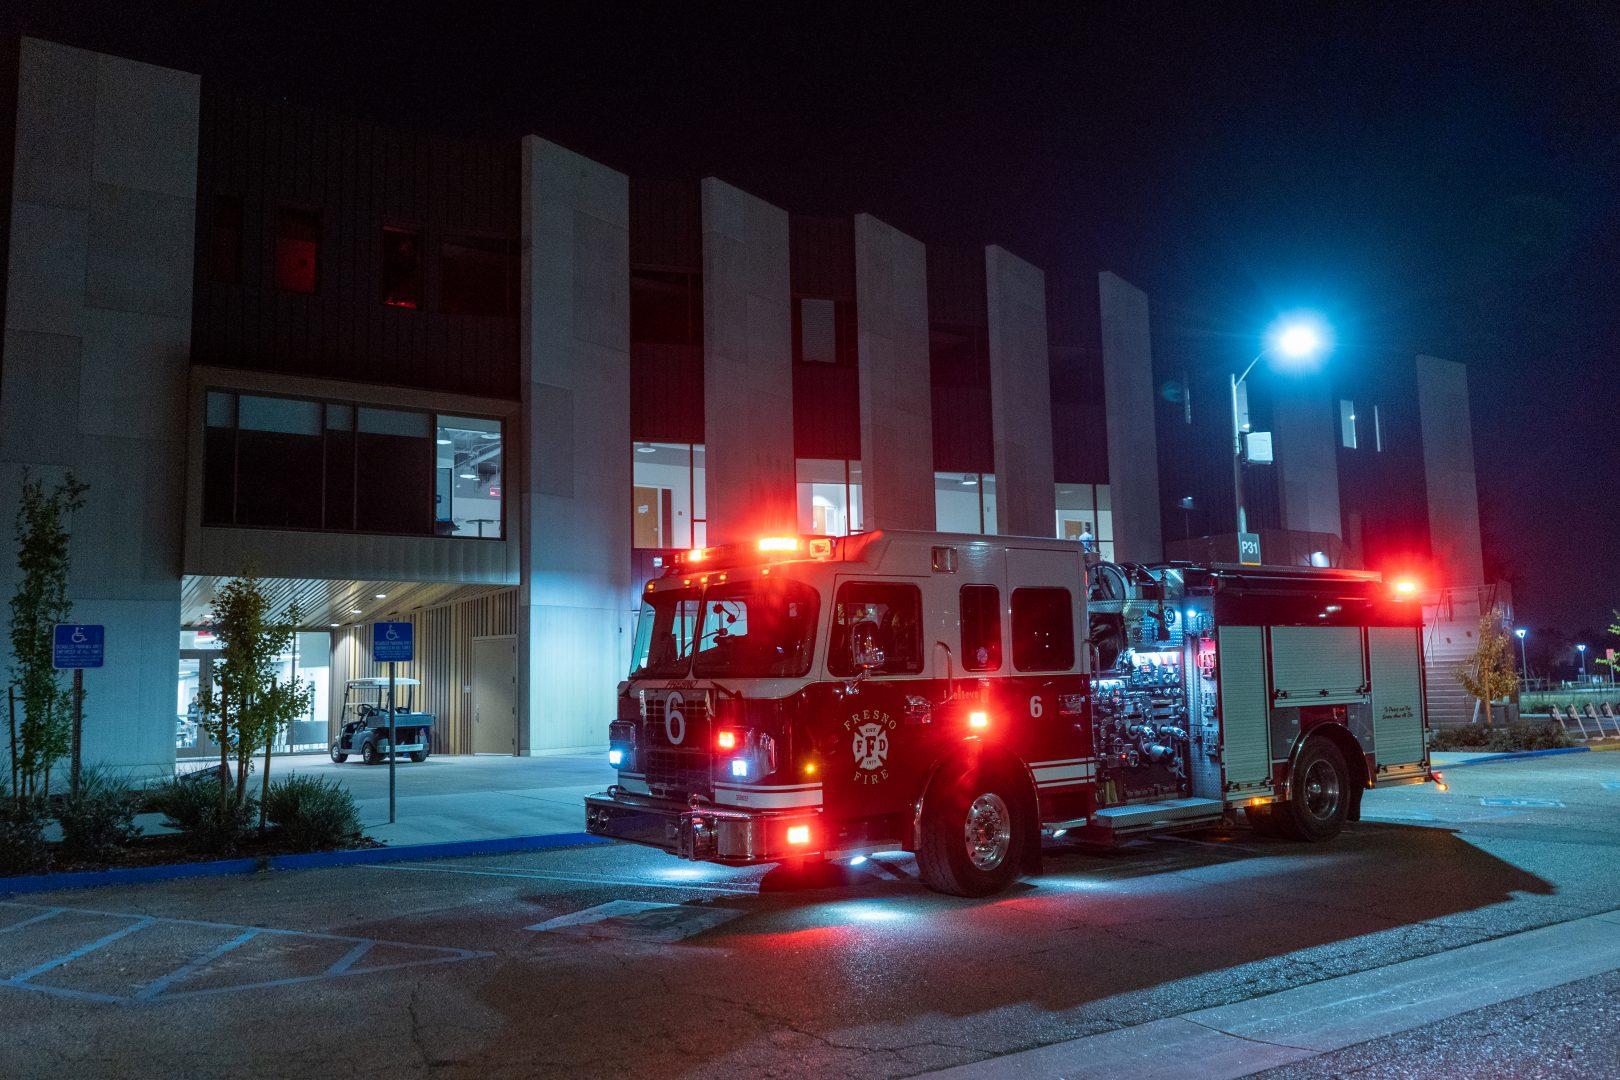 The Fresno Fire Department received an emergency call at 8:49 p.m. after a person was stuck in the Resnick Student Union elevator on Nov. 14. (Wyatt Bible/The Collegian)